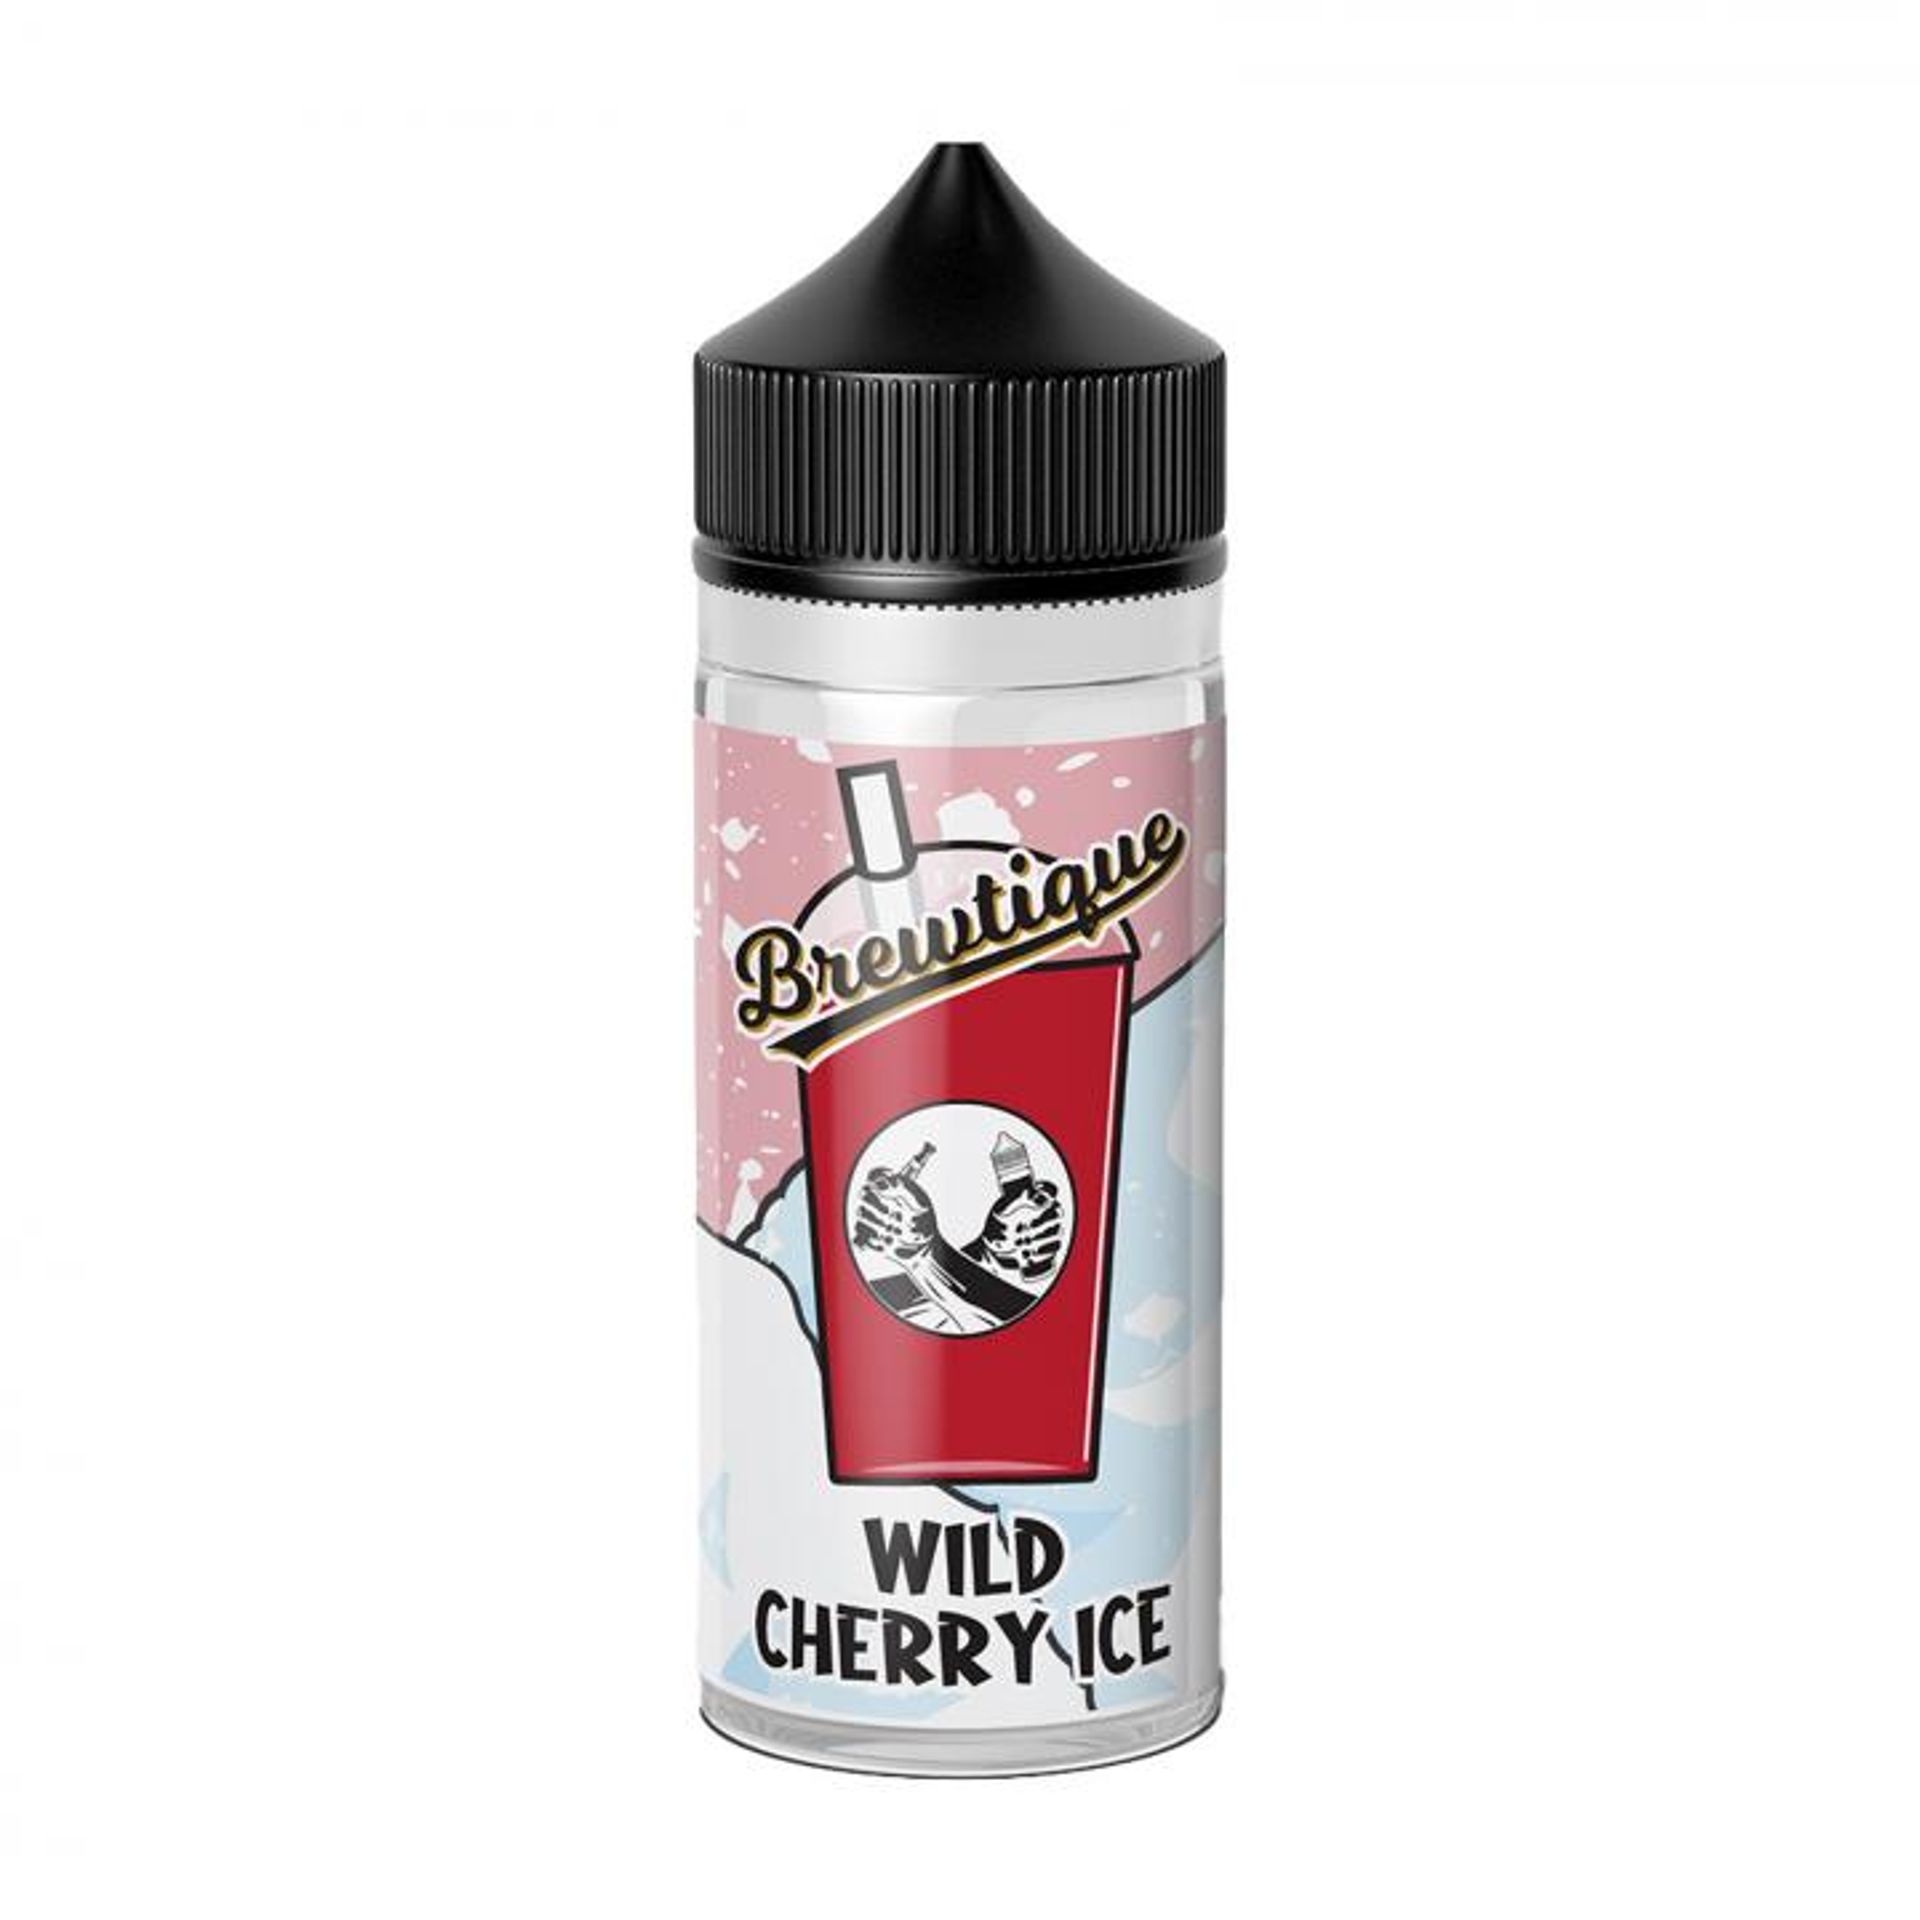 Image of Wild Cherry Ice by Brewtique